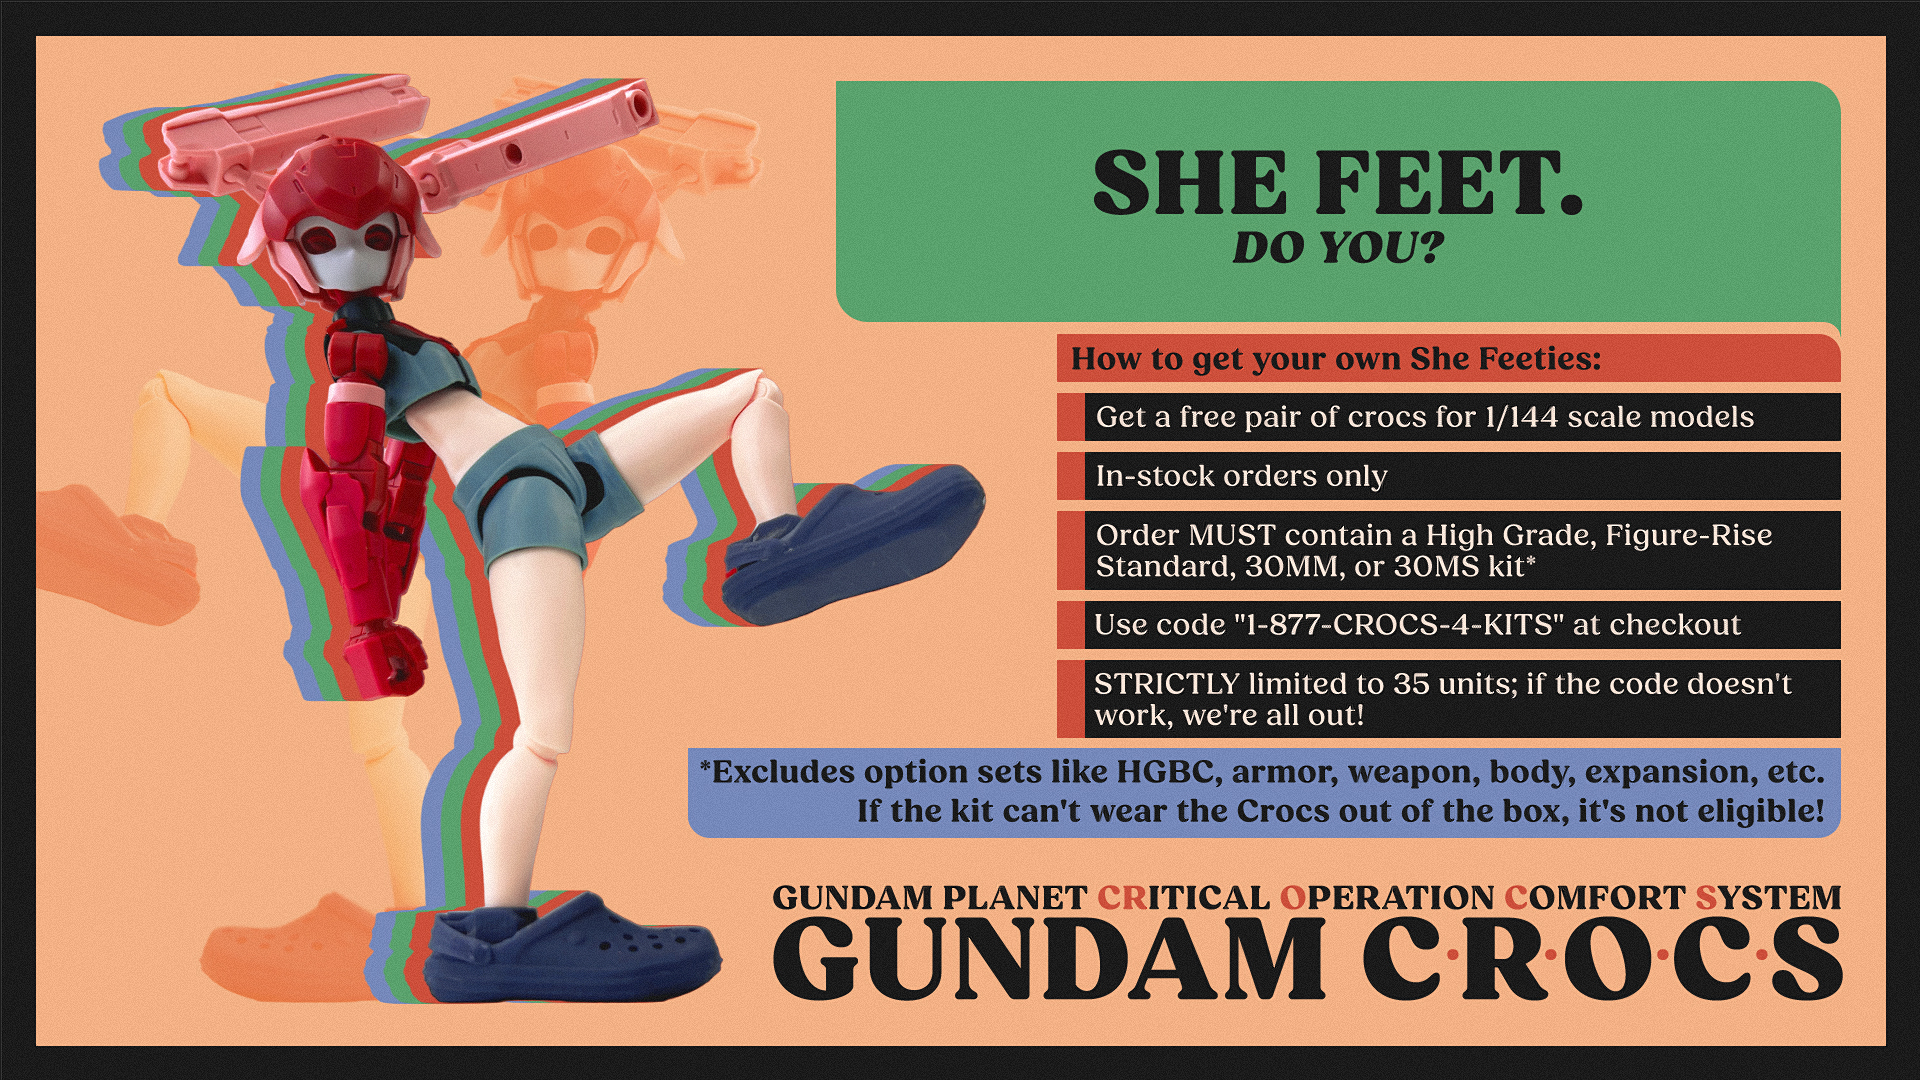 The Gundam Planet CRitical Operation Comfort System is now online. Accessorize your Gunpla today!